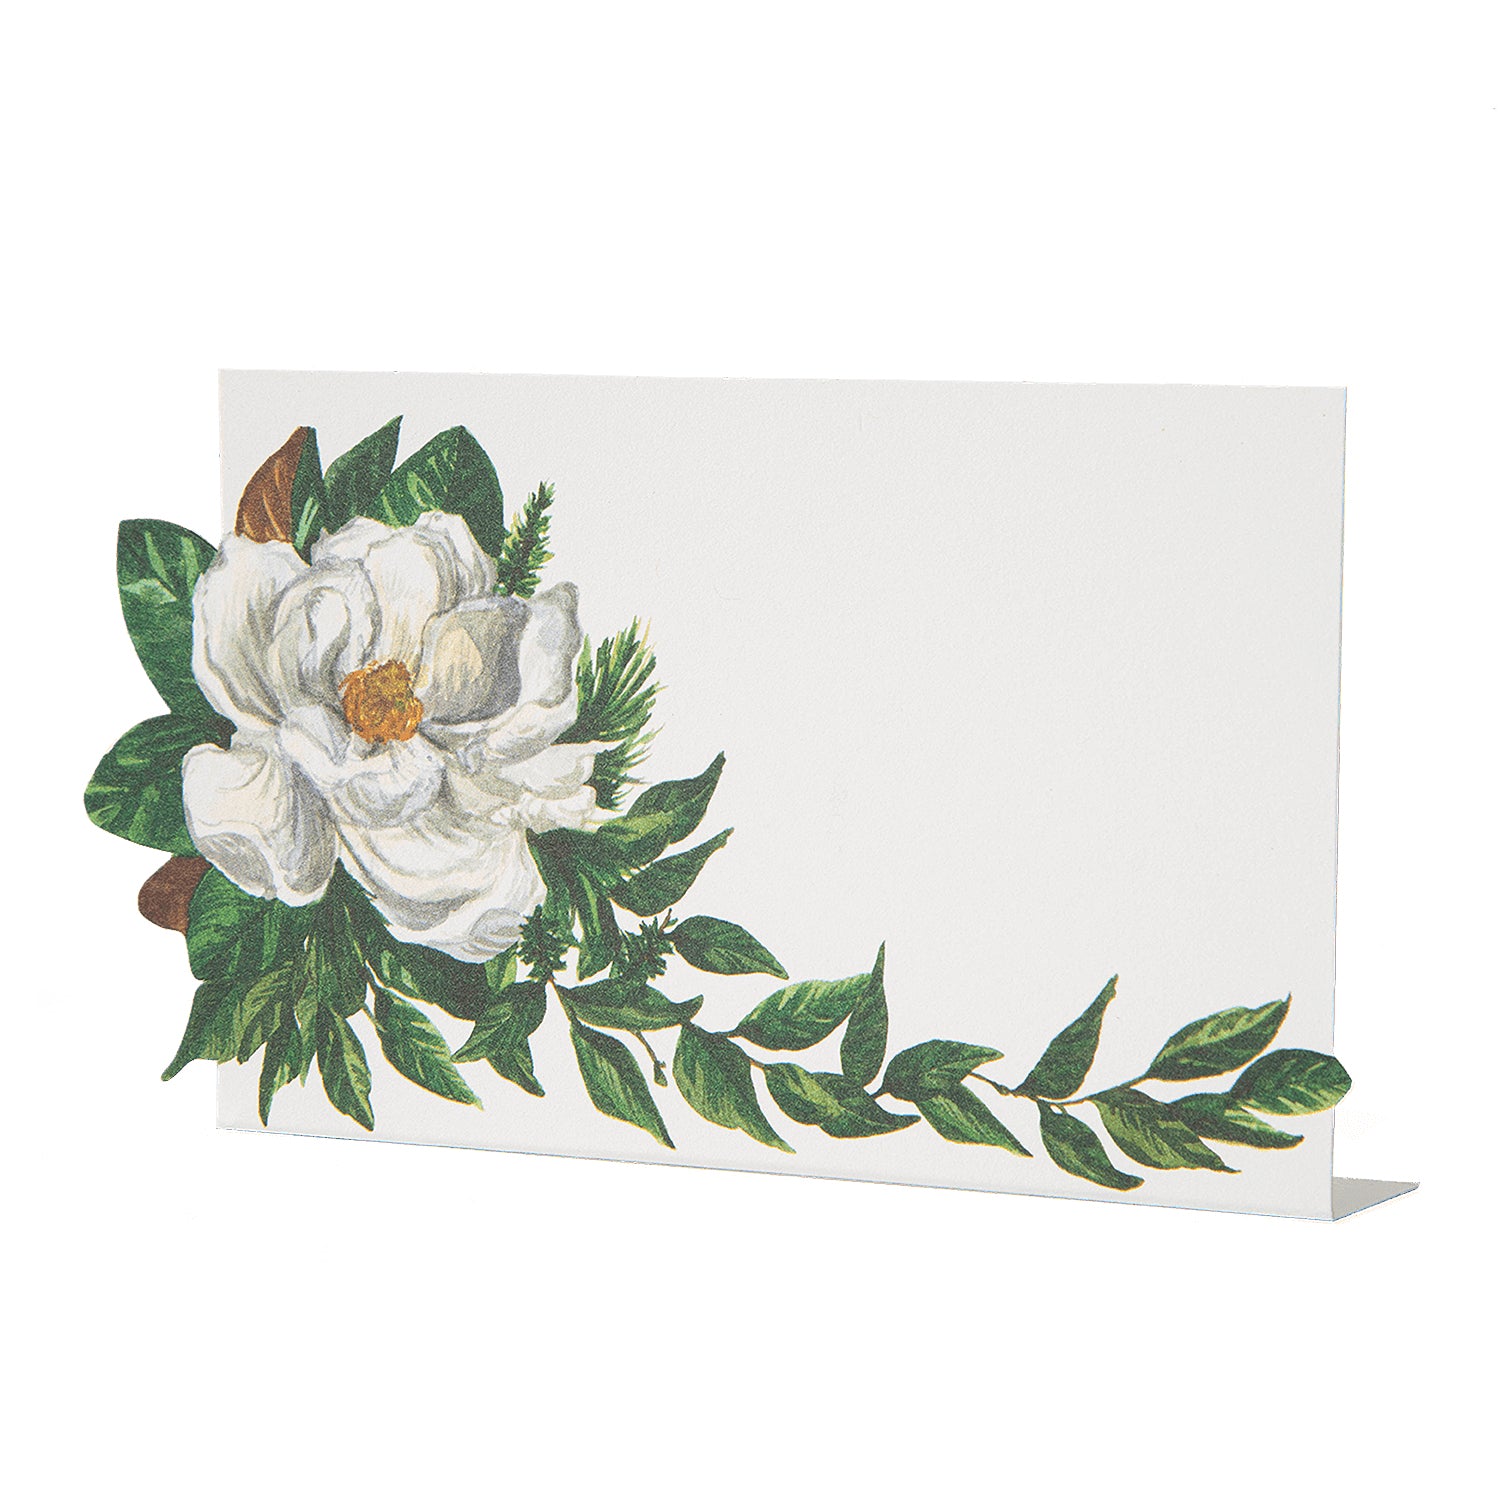 A white, rectangular freestanding place card featuring artwork of a white magnolia bloom adorning the left side of the card, with deep green foliage around the flower and trailing along the bottom edge of the card.